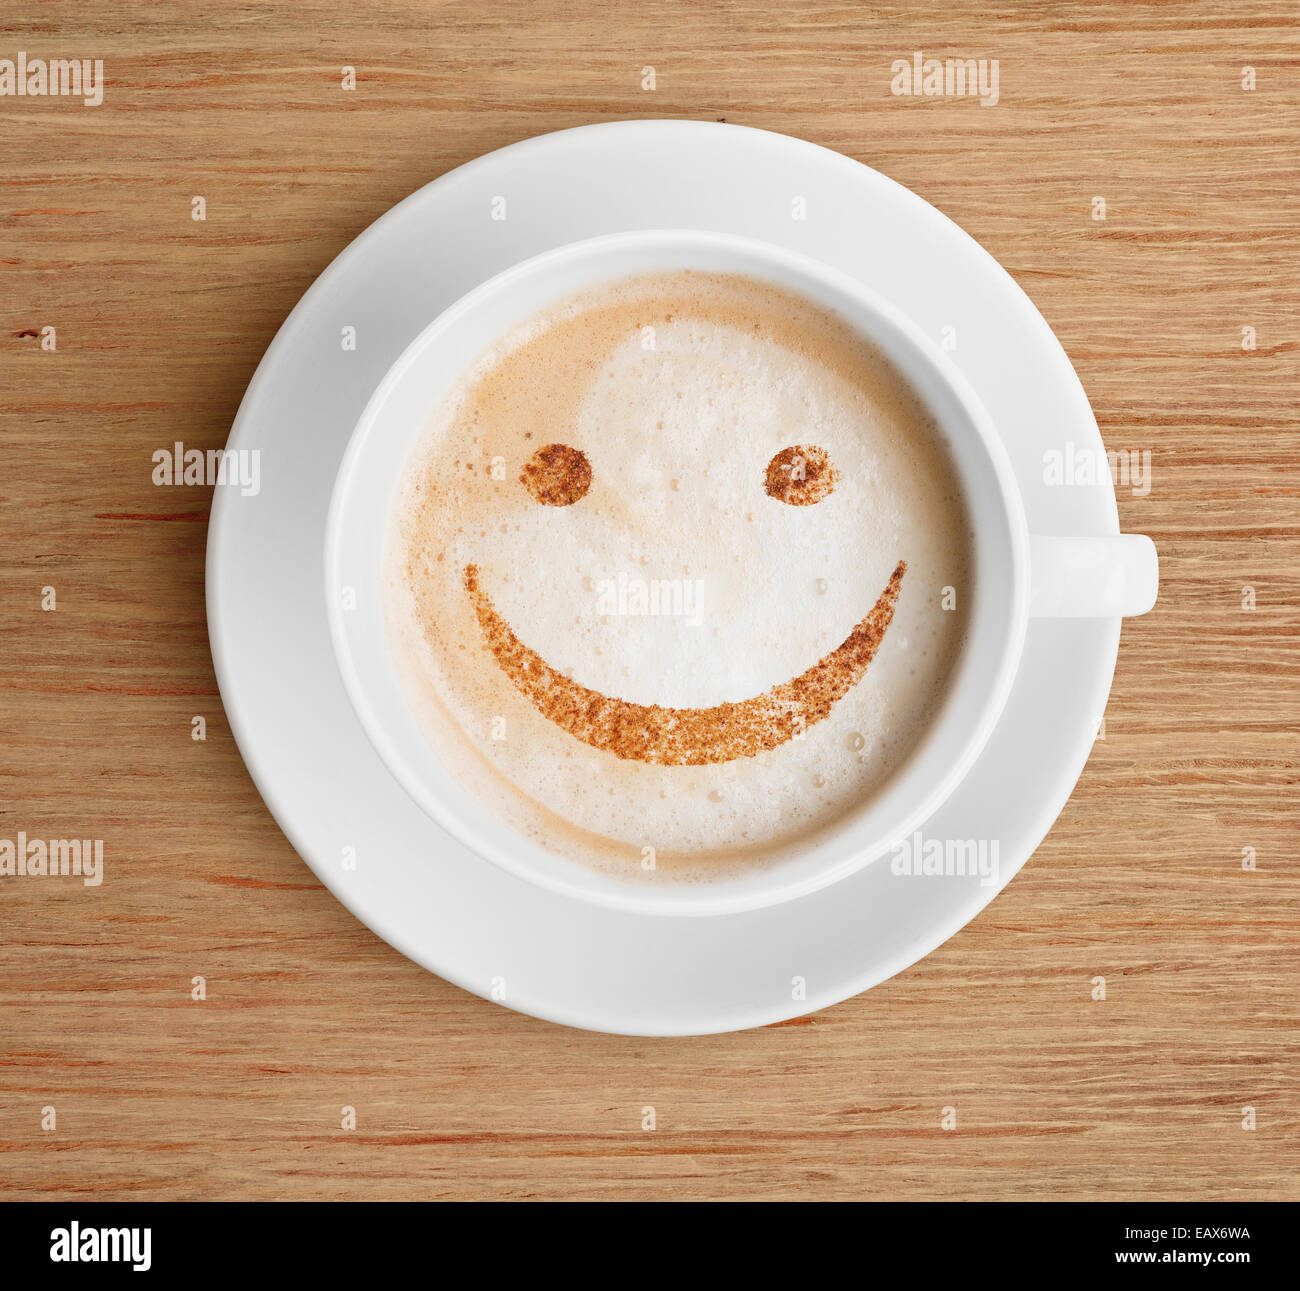 smilling cappuccino or latte coffee cup top view Stock Photo